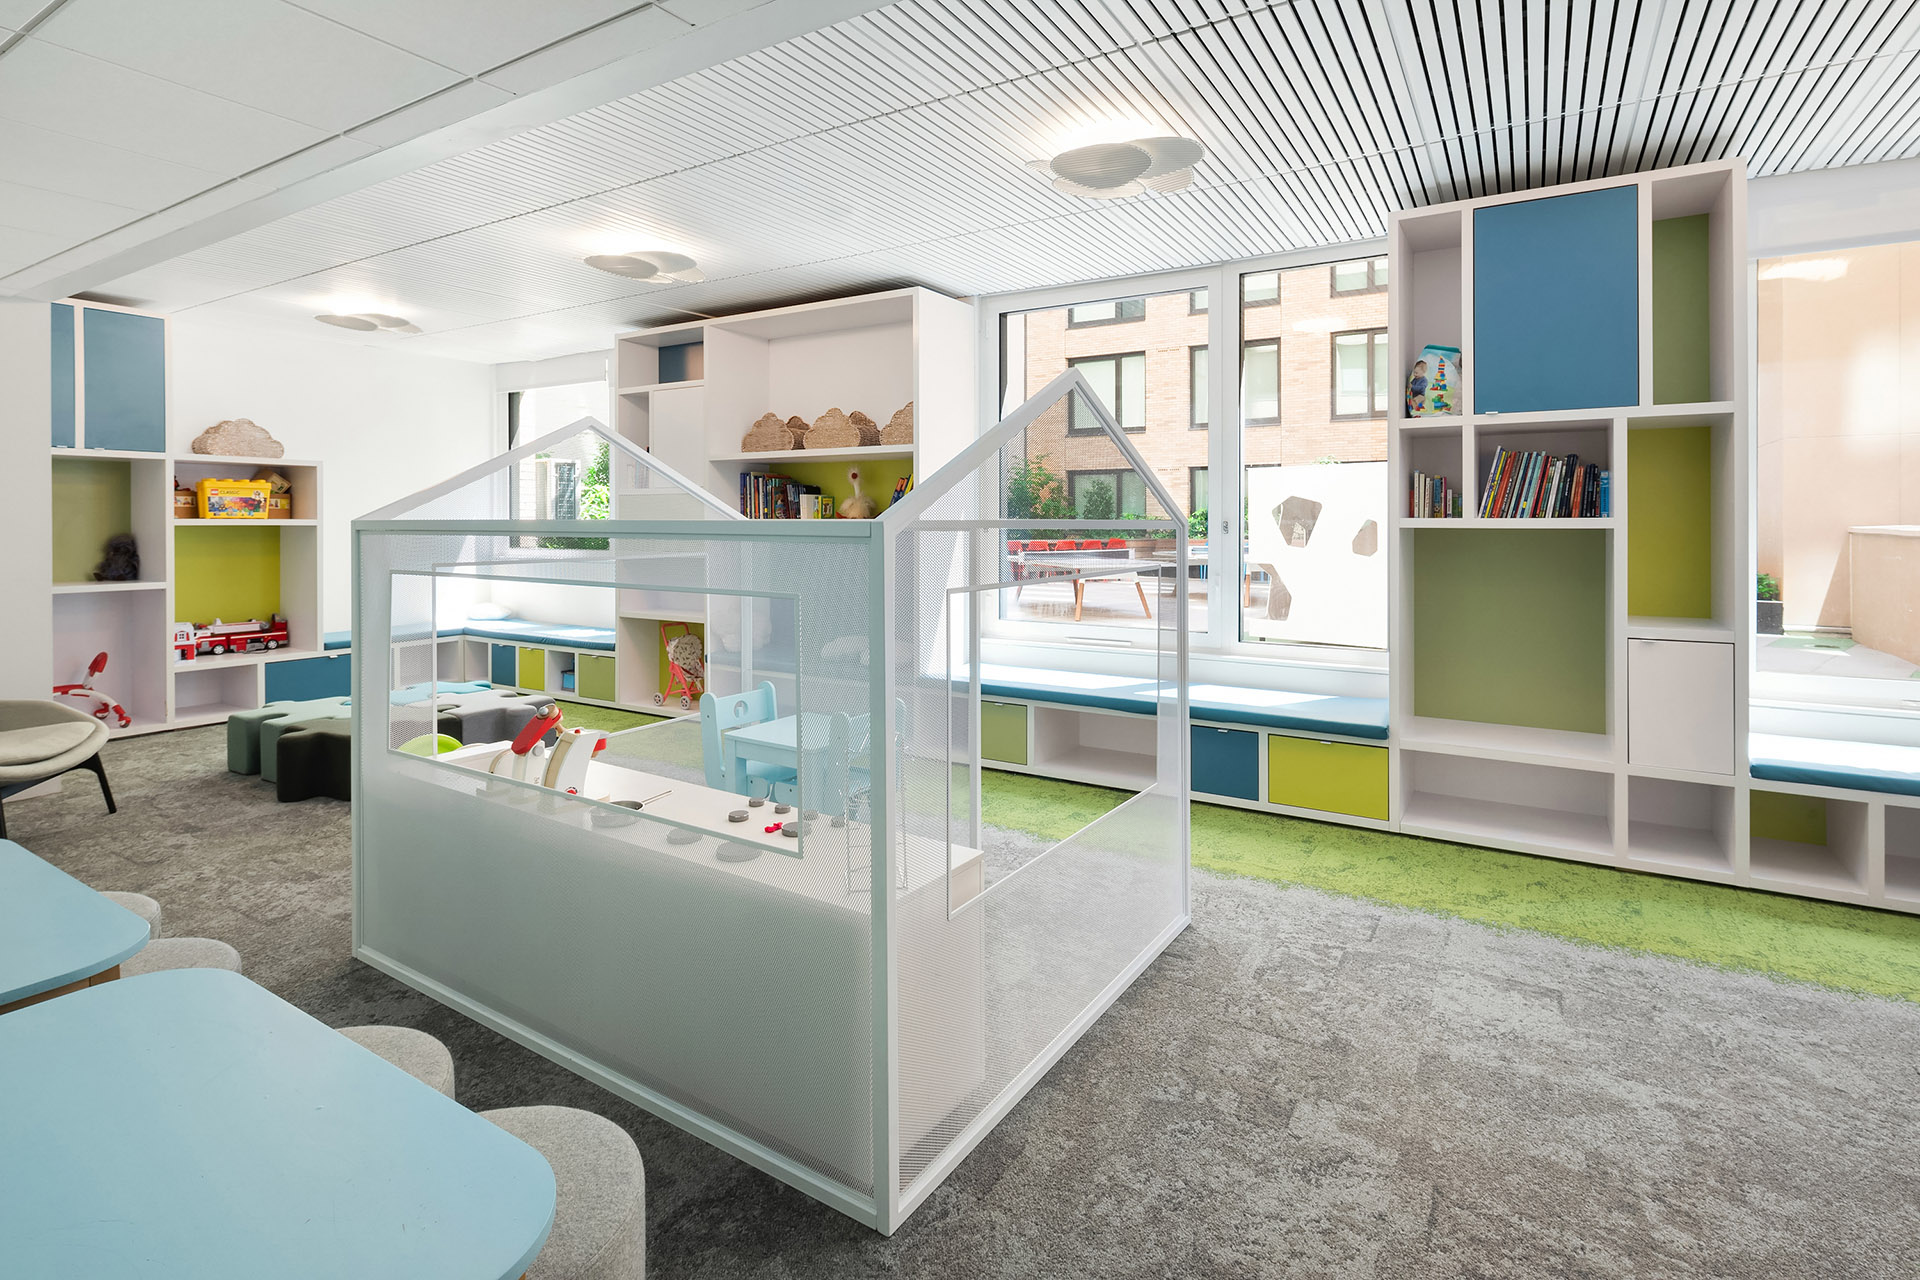 Children's Interactive Playroom that is full of toys and also a space for programming